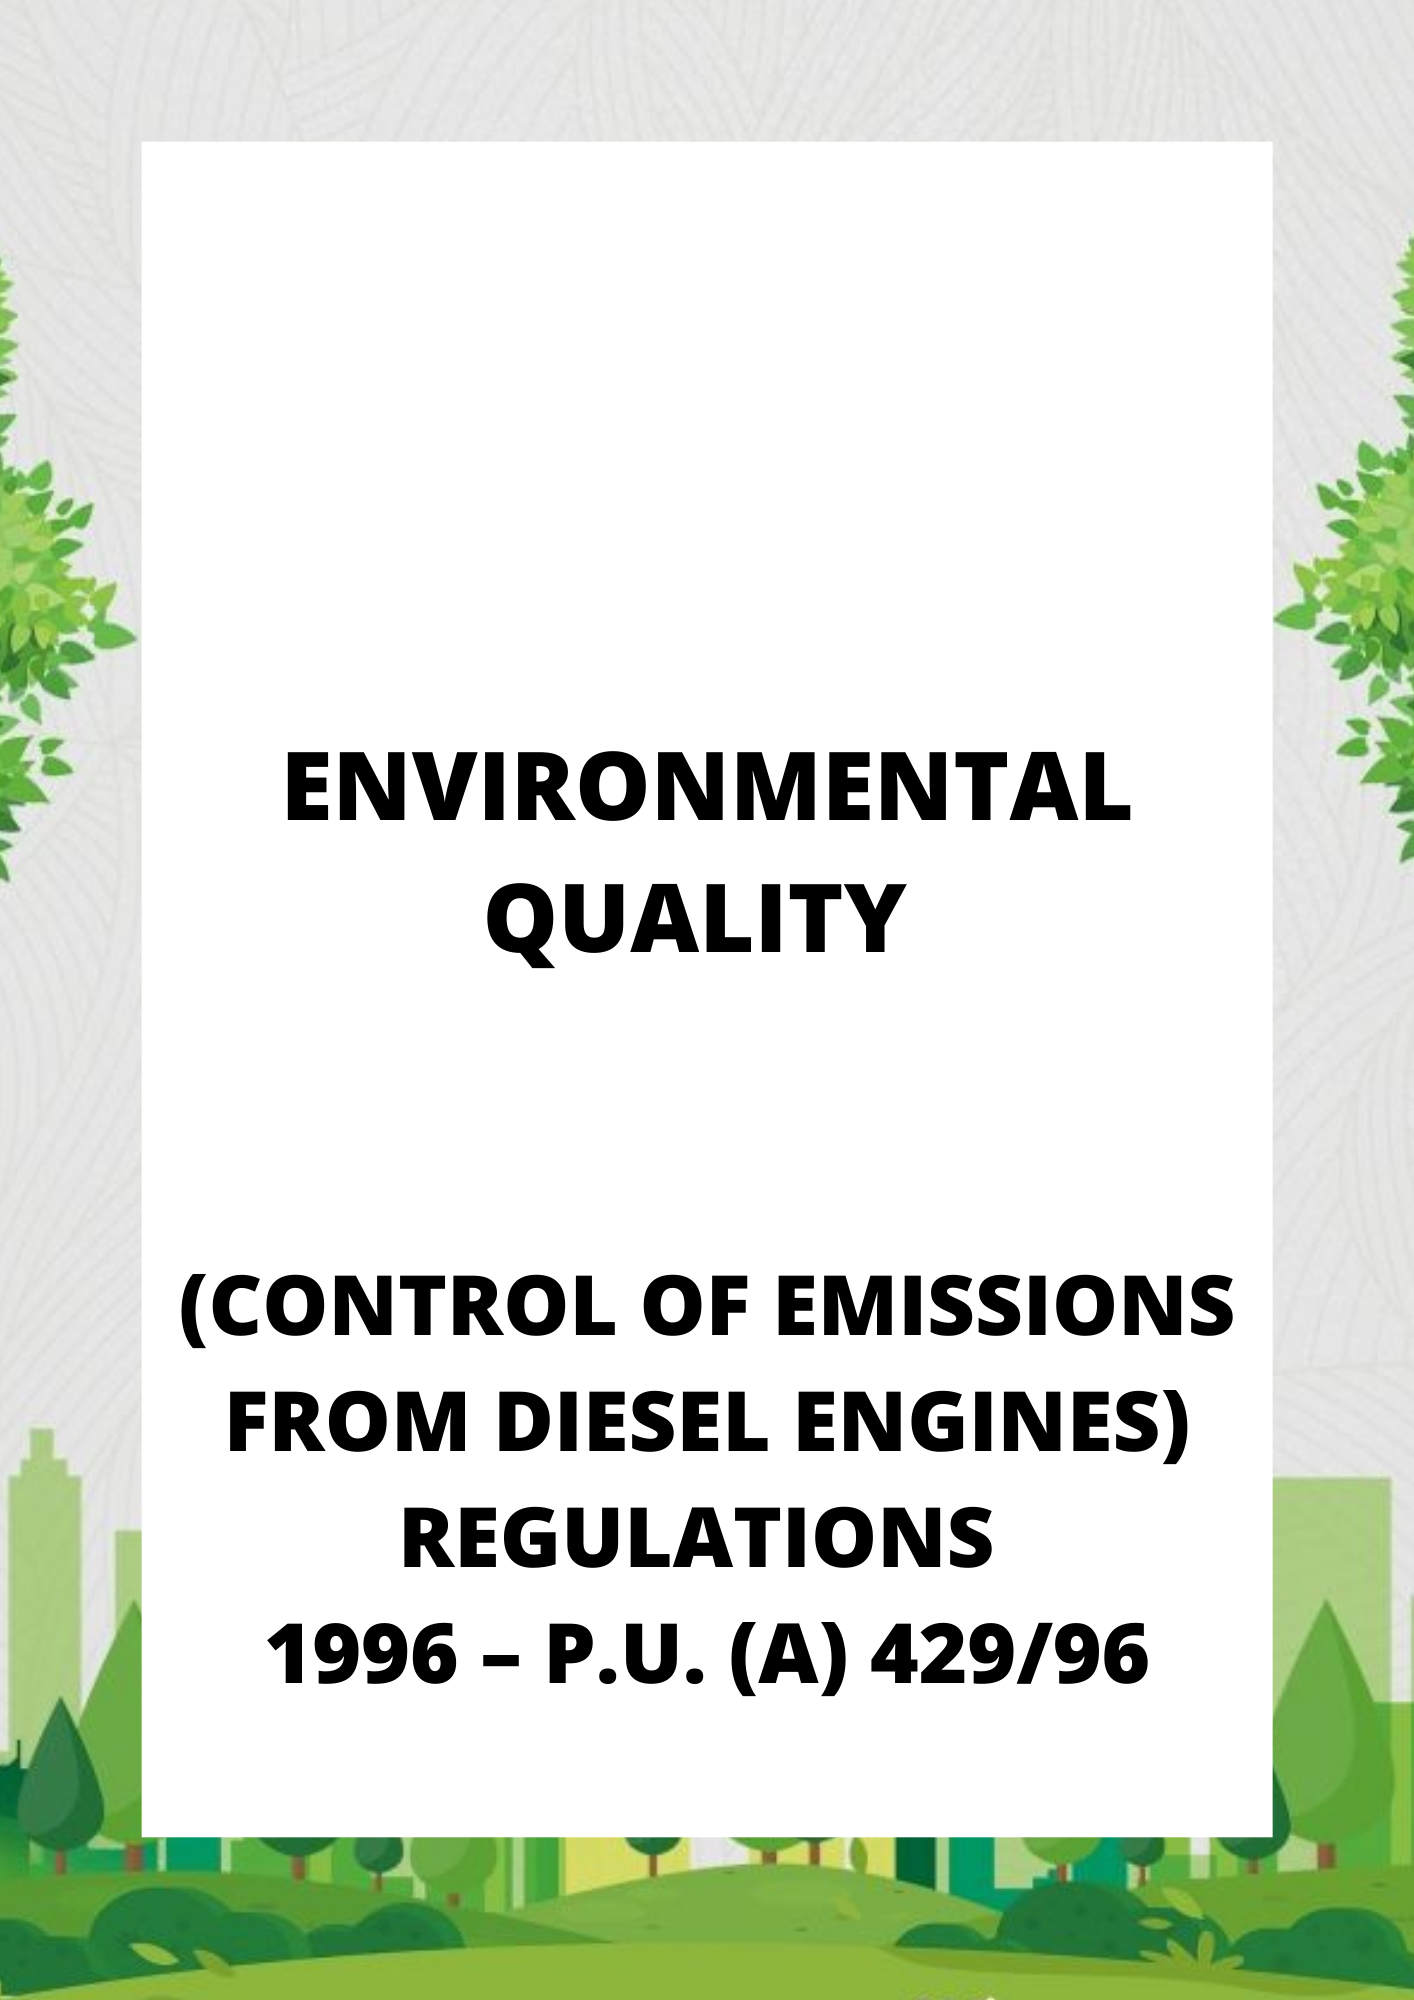 Environmental Quality (Control of Emissions from Diesel Engines) Regulations 1996 – P.U. (A) 42996